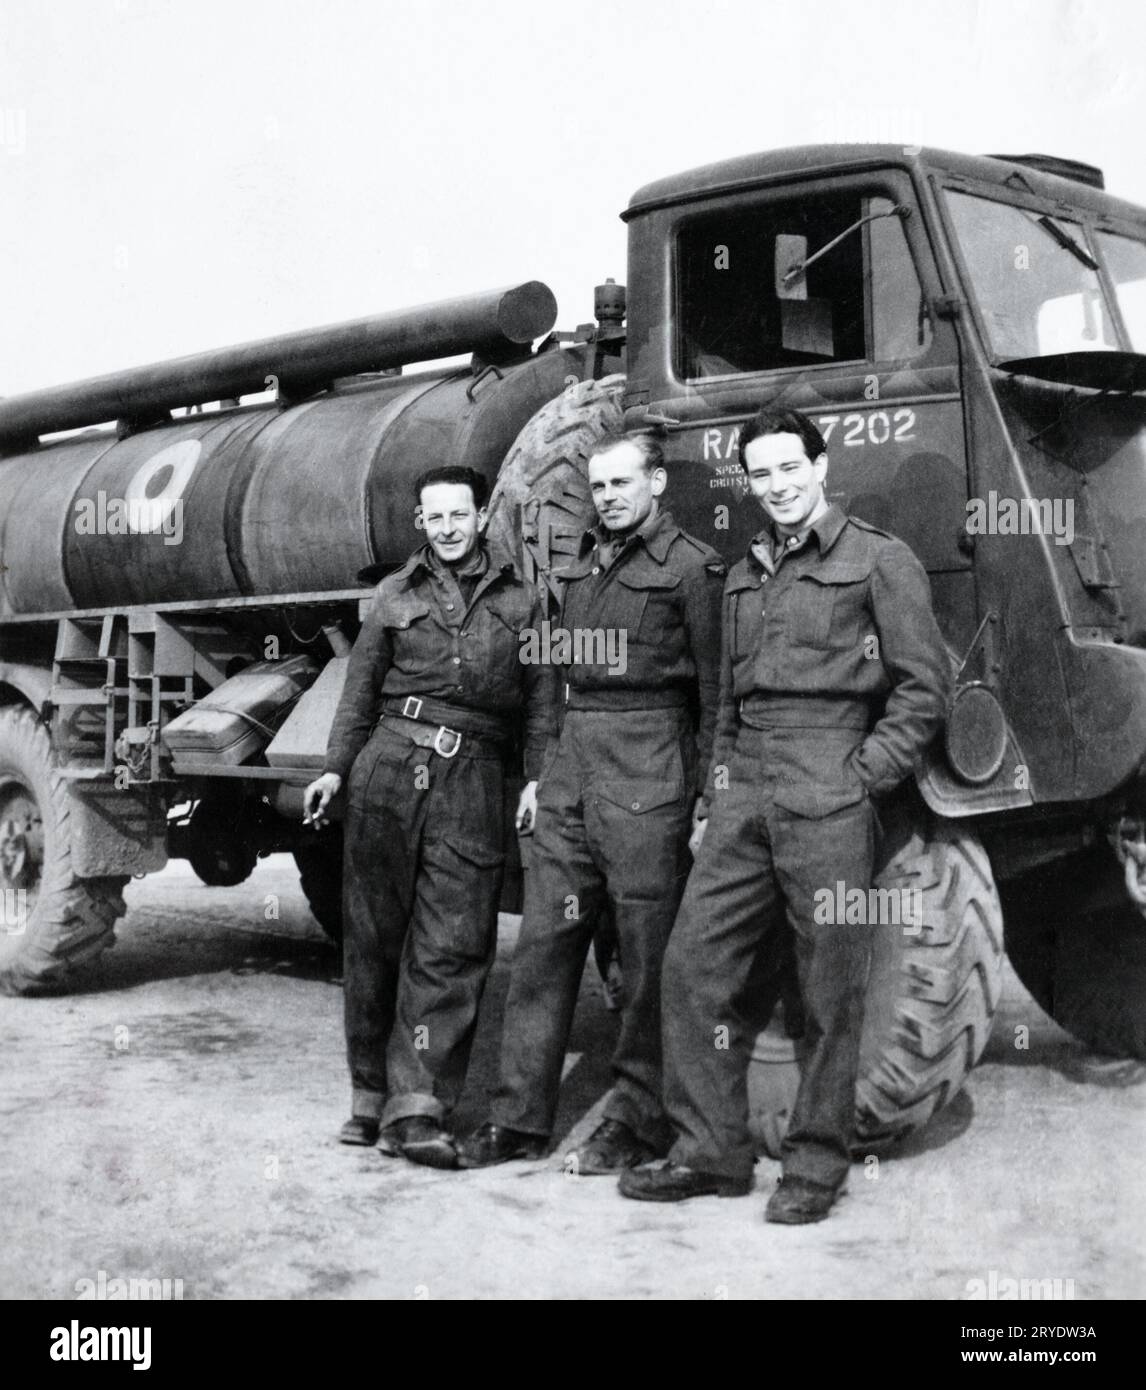 RAF ground crew with a Bedford tanker of 85 Group, 2nd Tactical Air Force. Taken in Melsbroek, Belgium, March 1945. Stock Photo